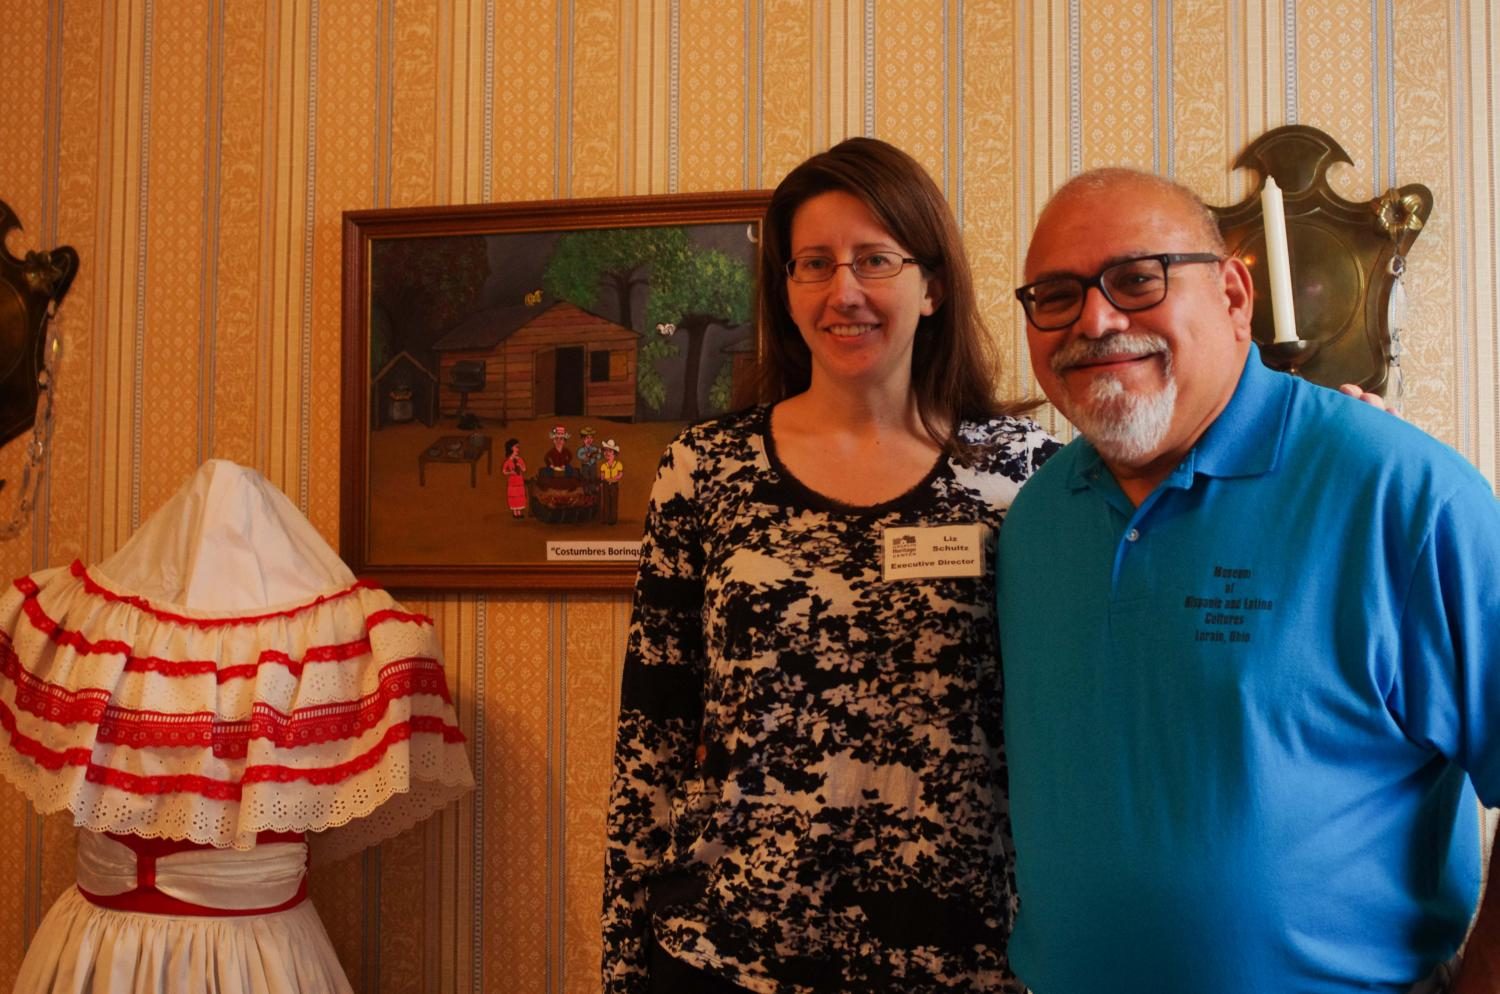 Liz Schultz (left), executive director of the Oberlin Heritage Center, and Guillermo Arriaga, president and director of the Museum of Hispanic and Latino Cultures of Lorain, have collaboratively curated an exhibition on Hispanic and Latino culture. that will be open to the public in Monroe House through September.